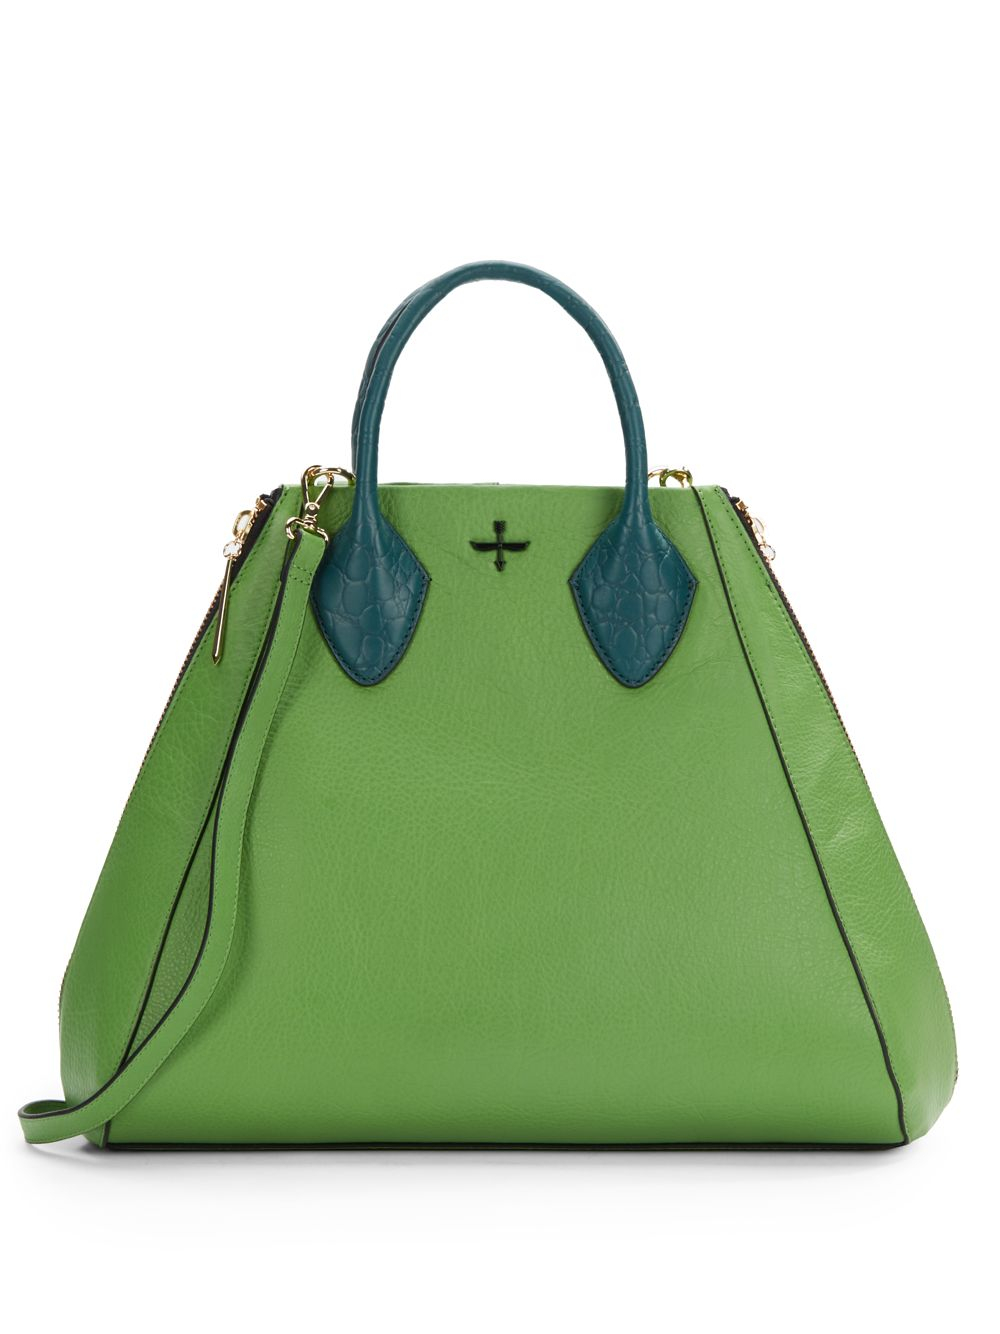 Pour La Victoire Yves Convertible Colorblock Leather Tote Bag in Green (acid green) | Lyst